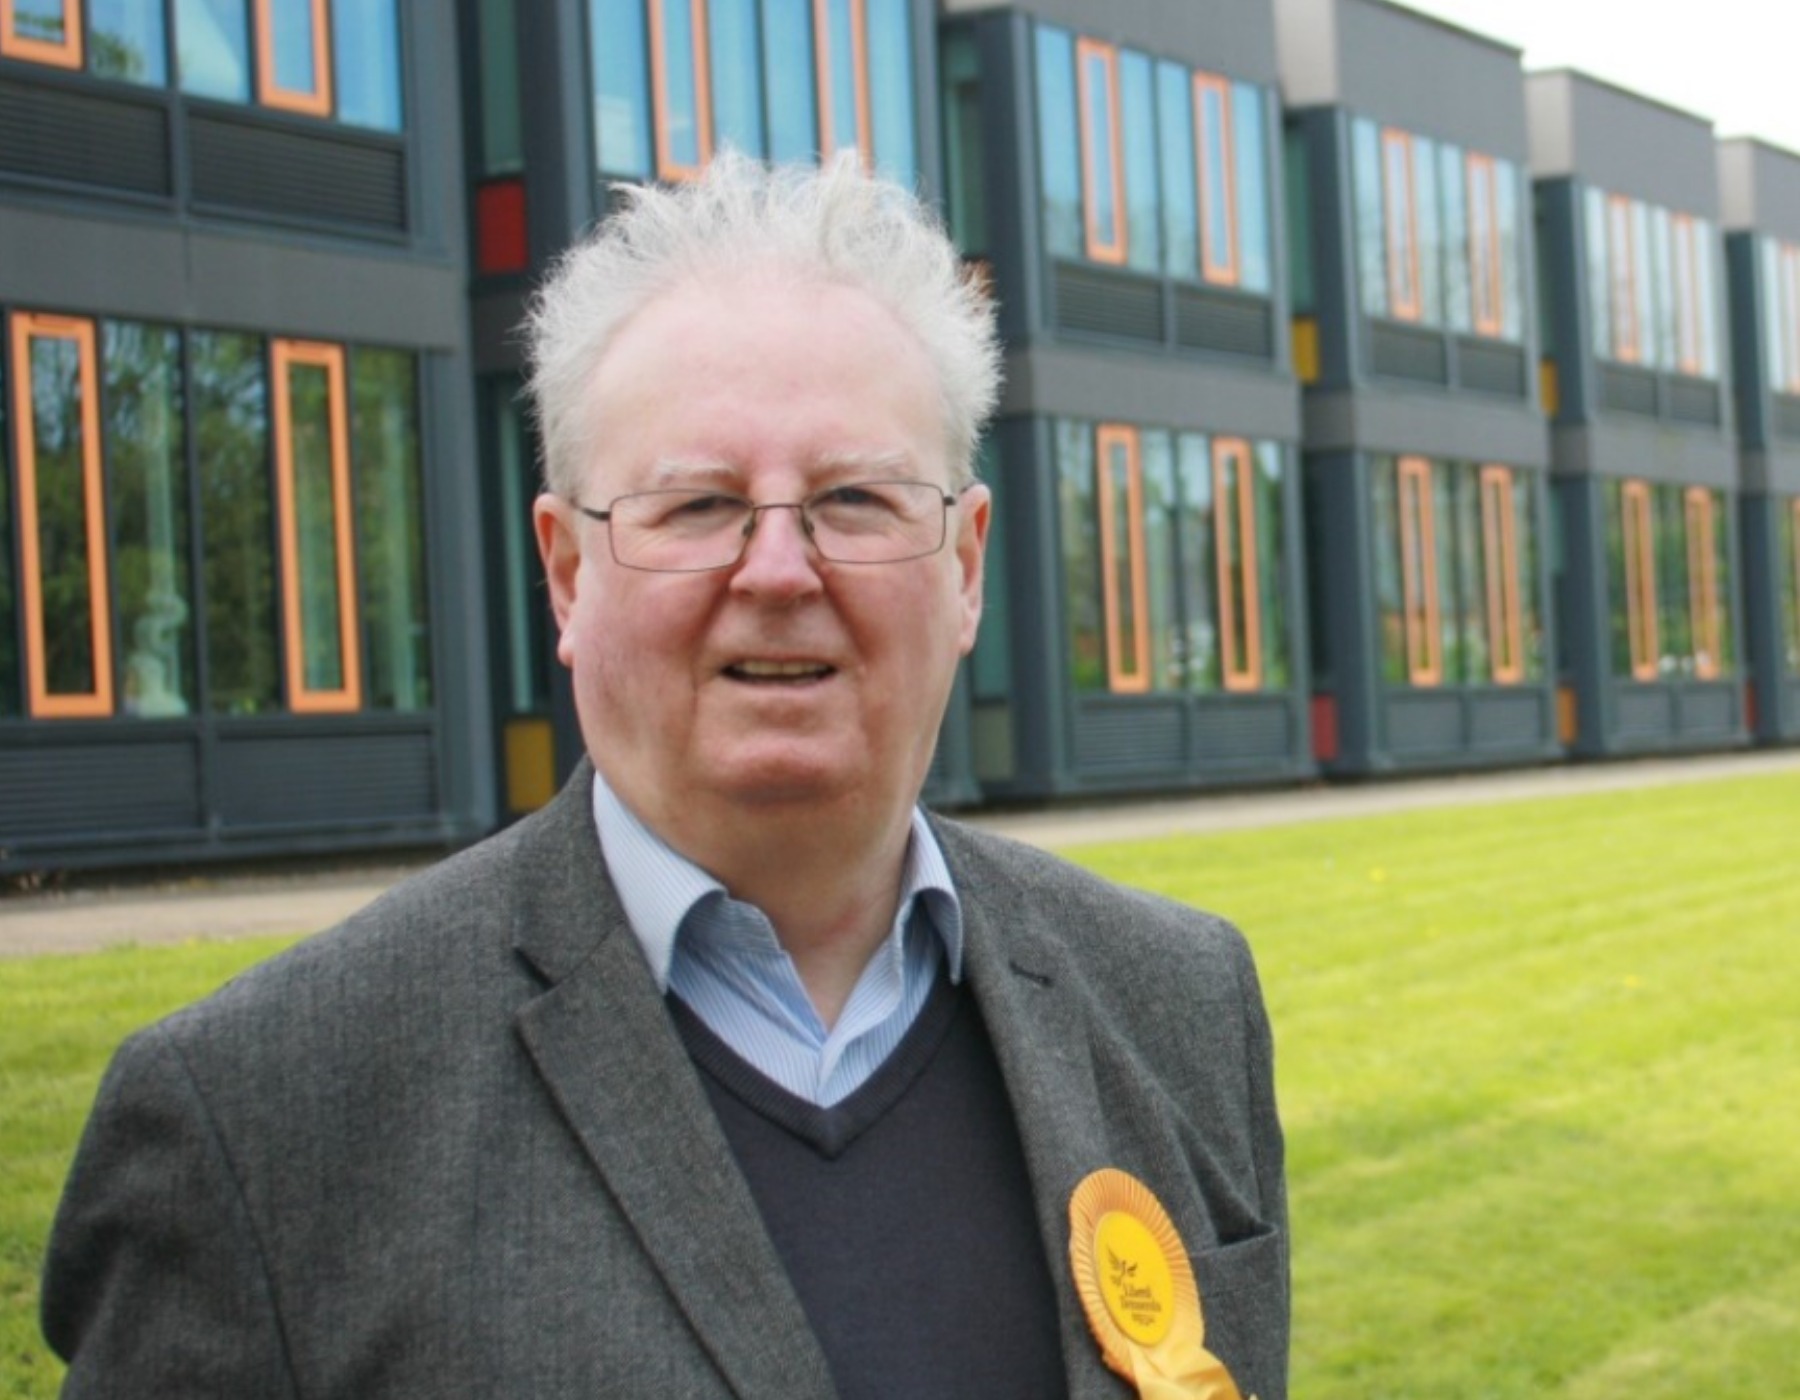 Liberal Democrat Police and Crime Commissioner candidate John Howson